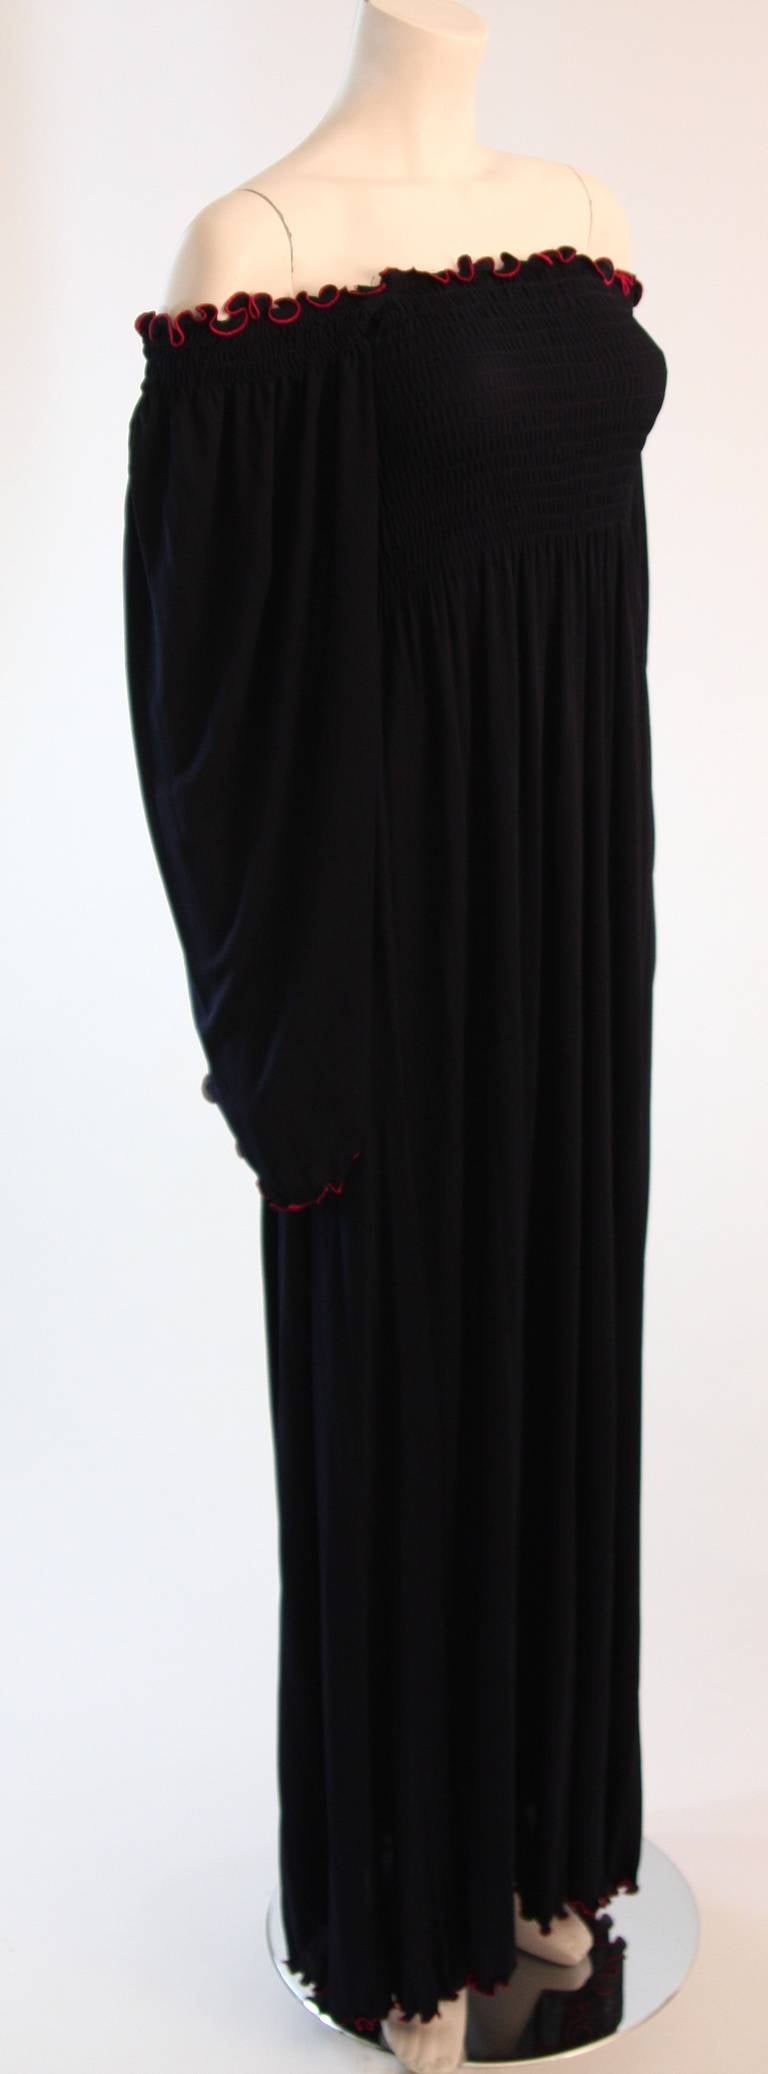 Women's Wonderful Vicky Tiel Navy Full Length Stretch Dress with Red Accent